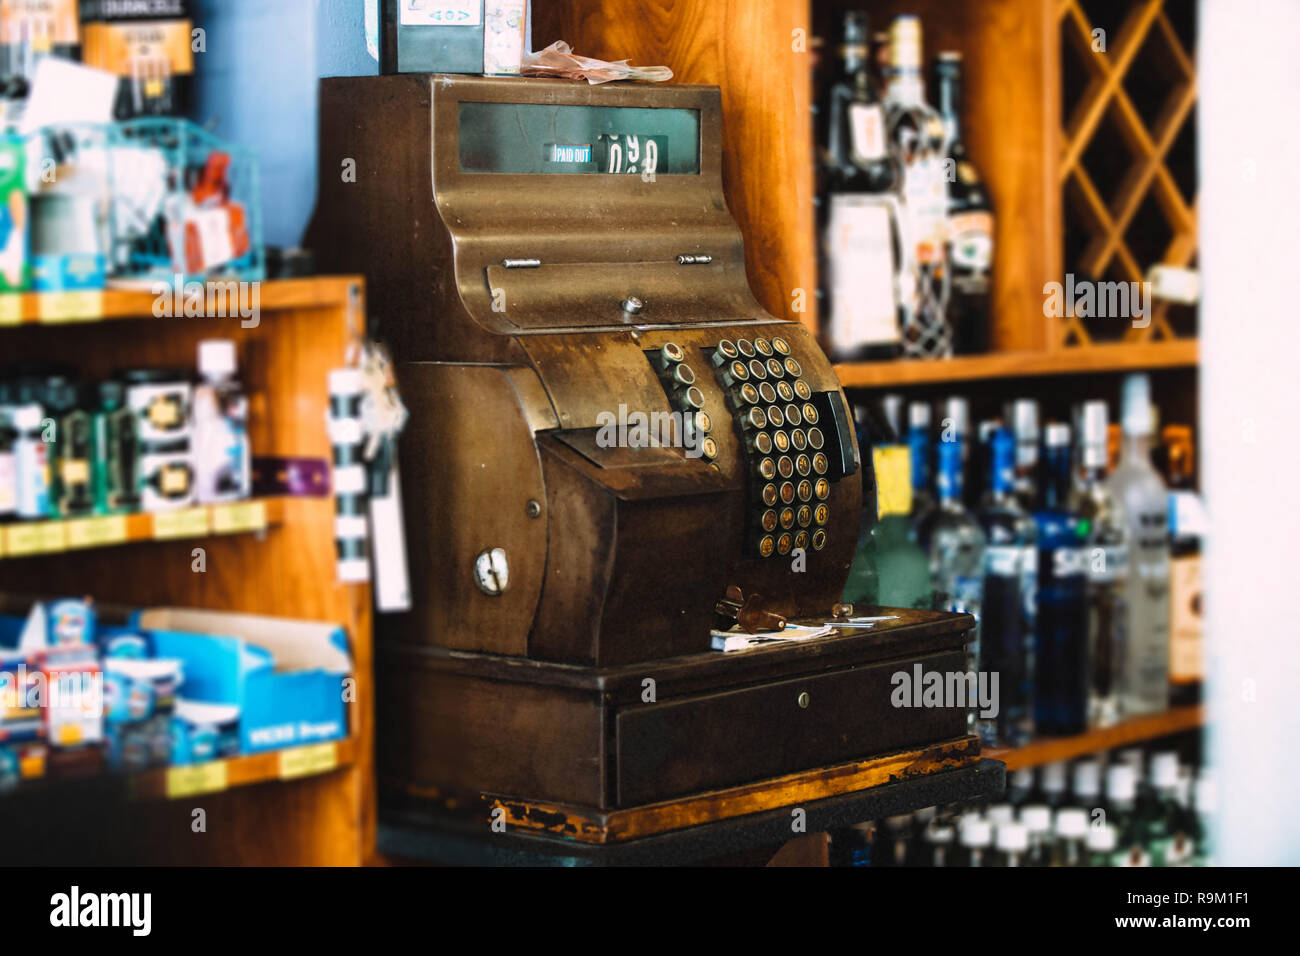 Antique cash only register machine in a shop Stock Photo